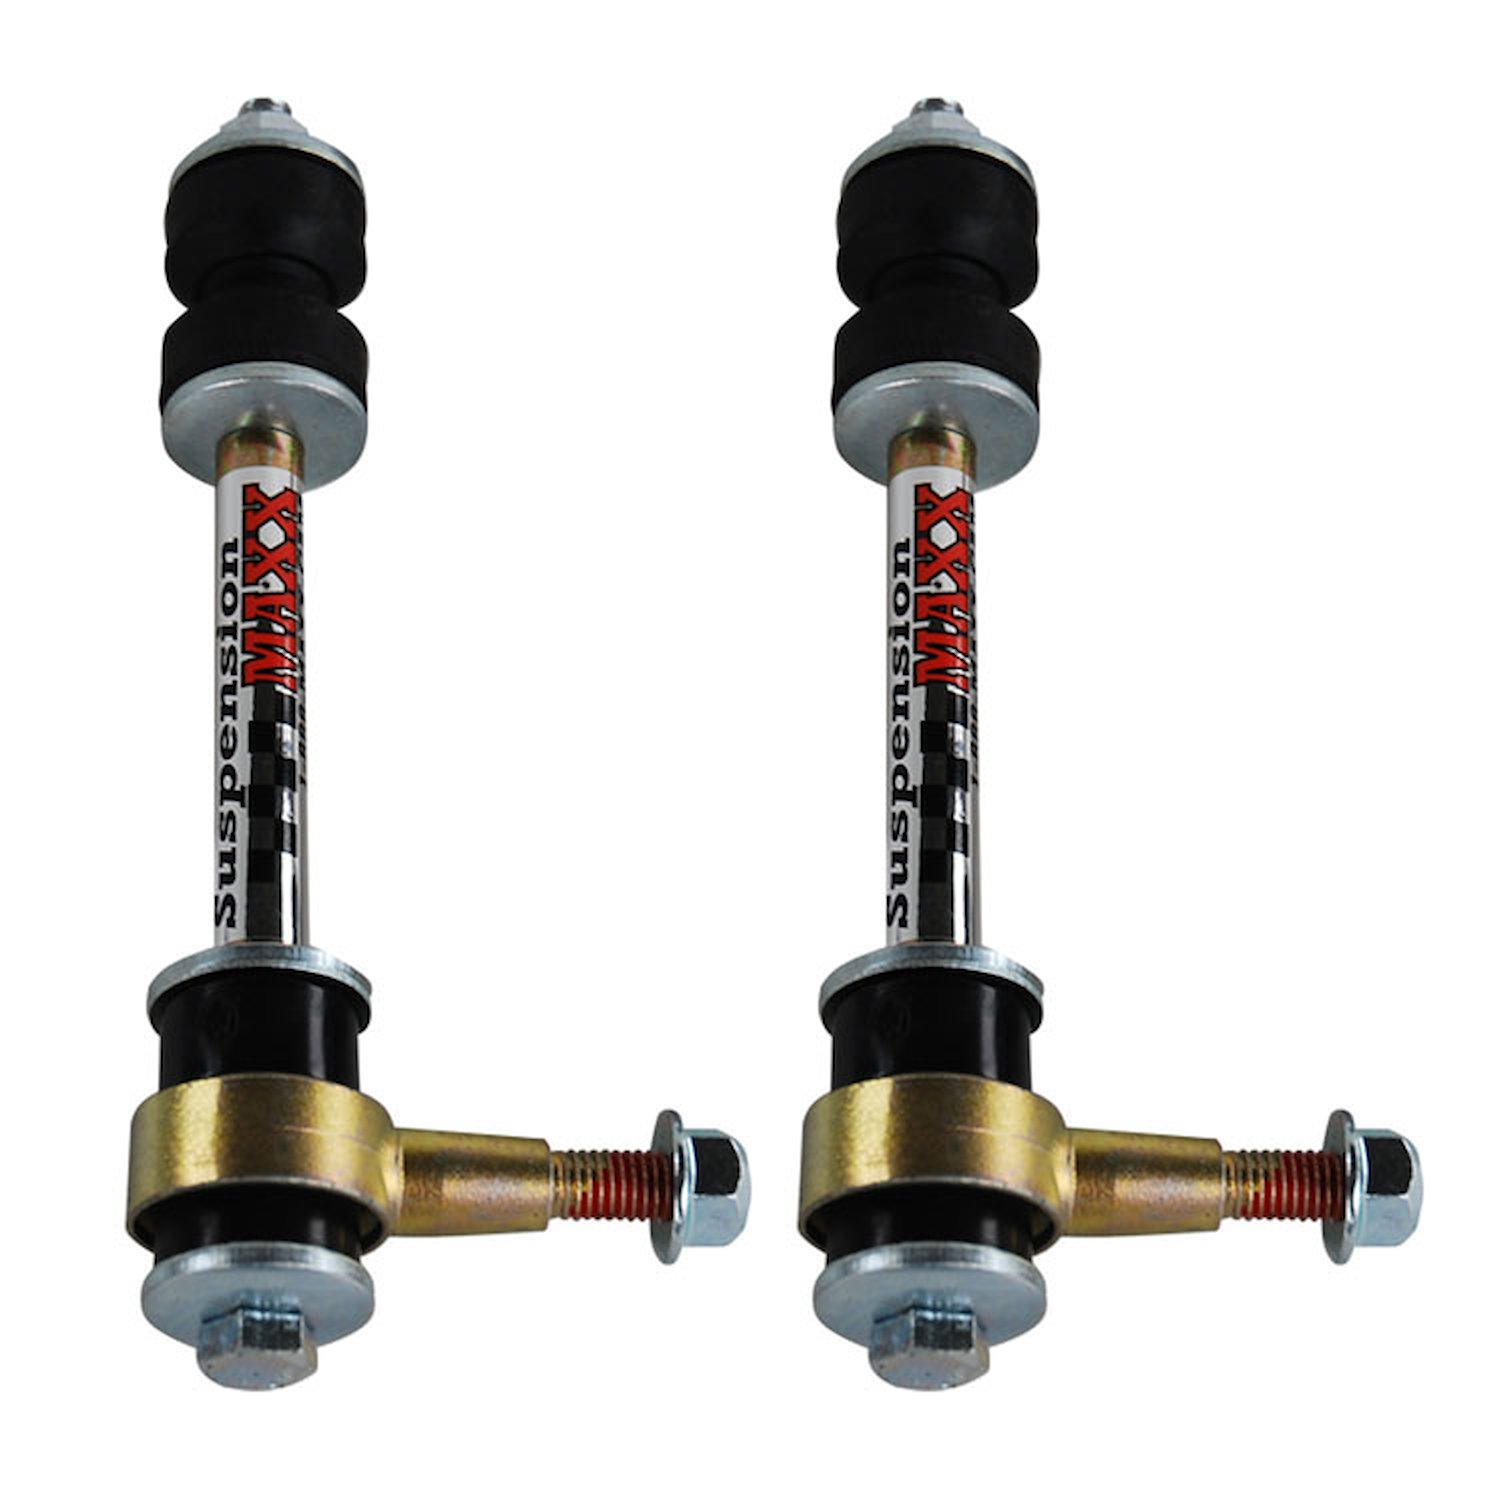 SMX-1226L HD Sway Bar Link Extended for 2003-2005 Dodge Ram 2500, 3500